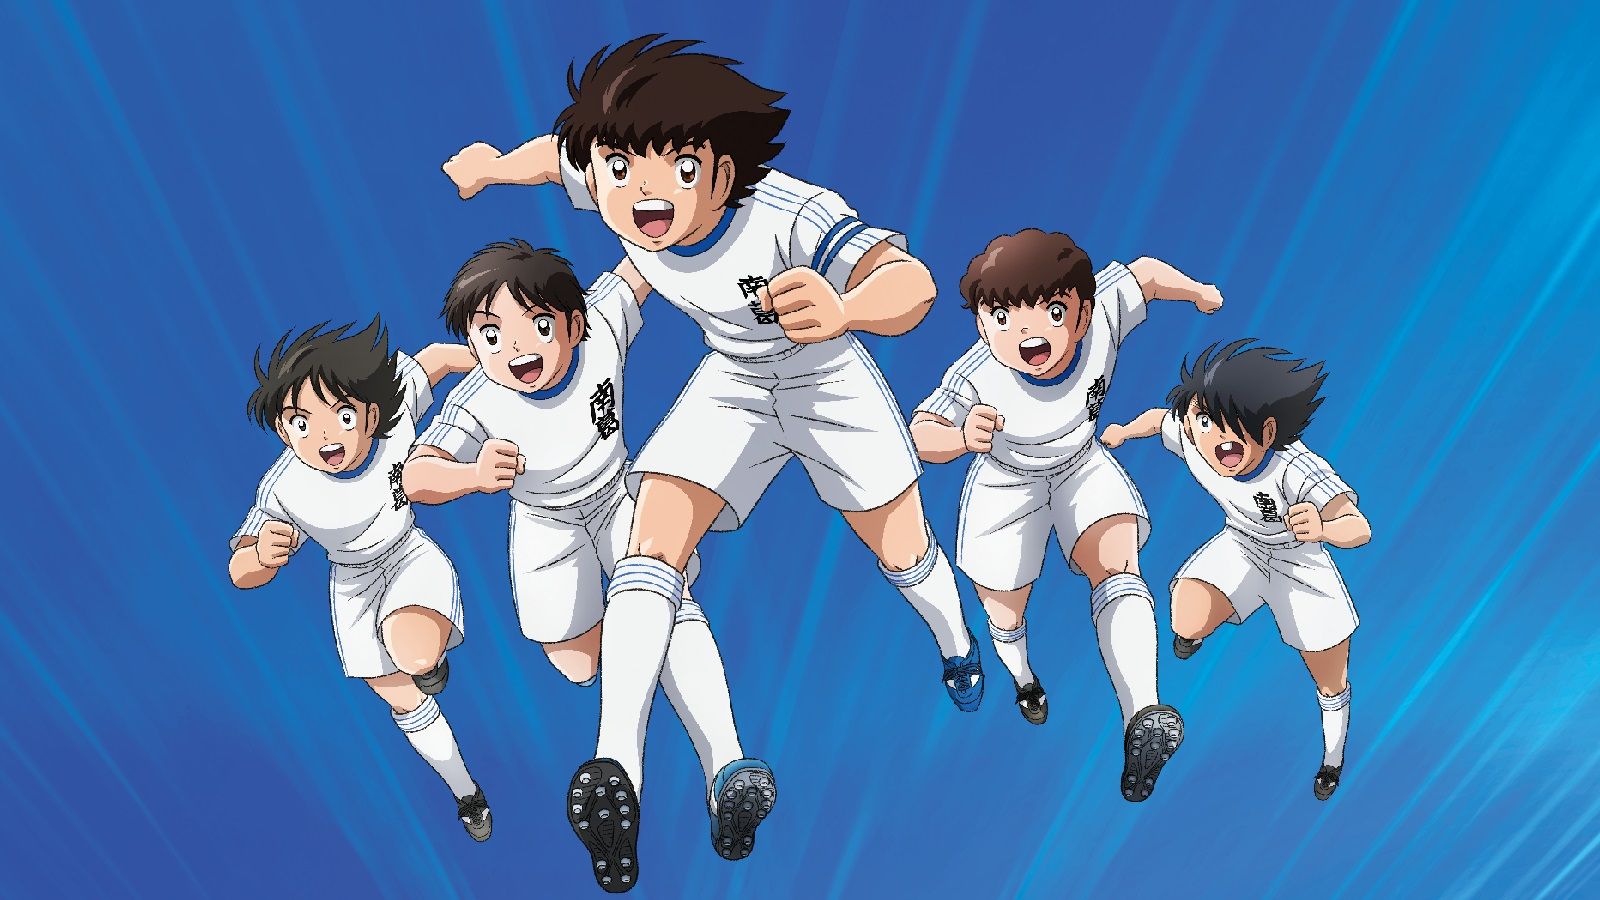 Soccer Anime HD Wallpapers - Wallpaper Cave